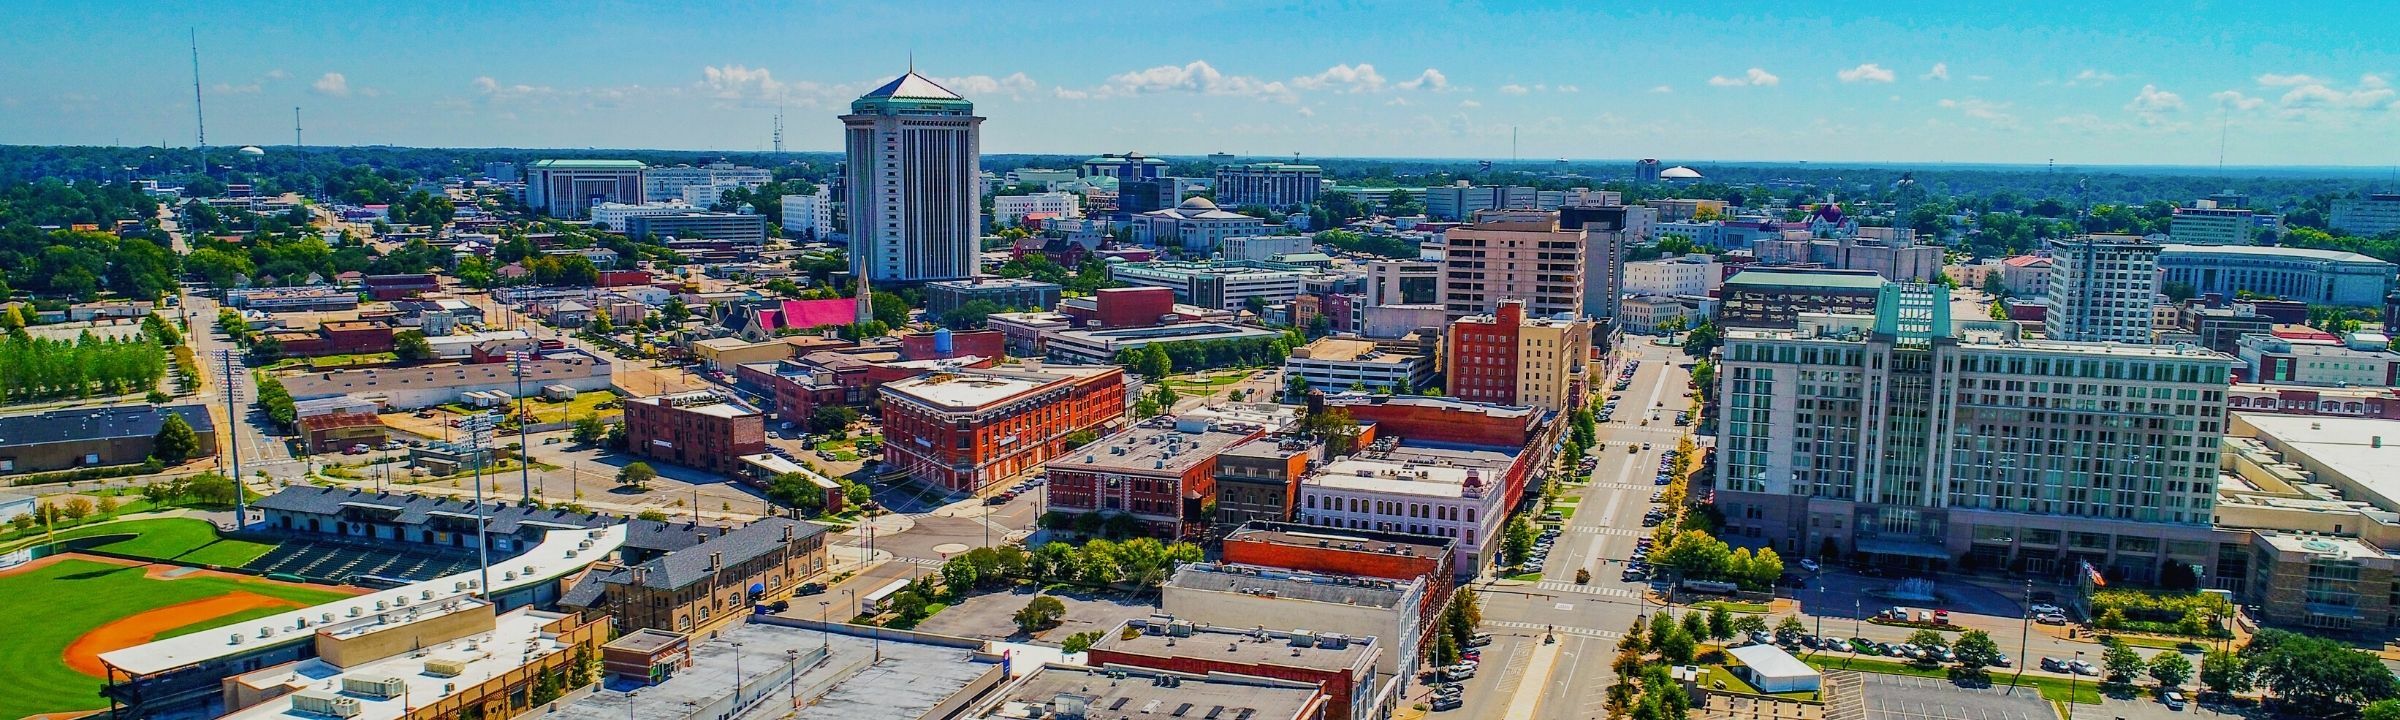 Montgomery Alabama aerial view of downtown